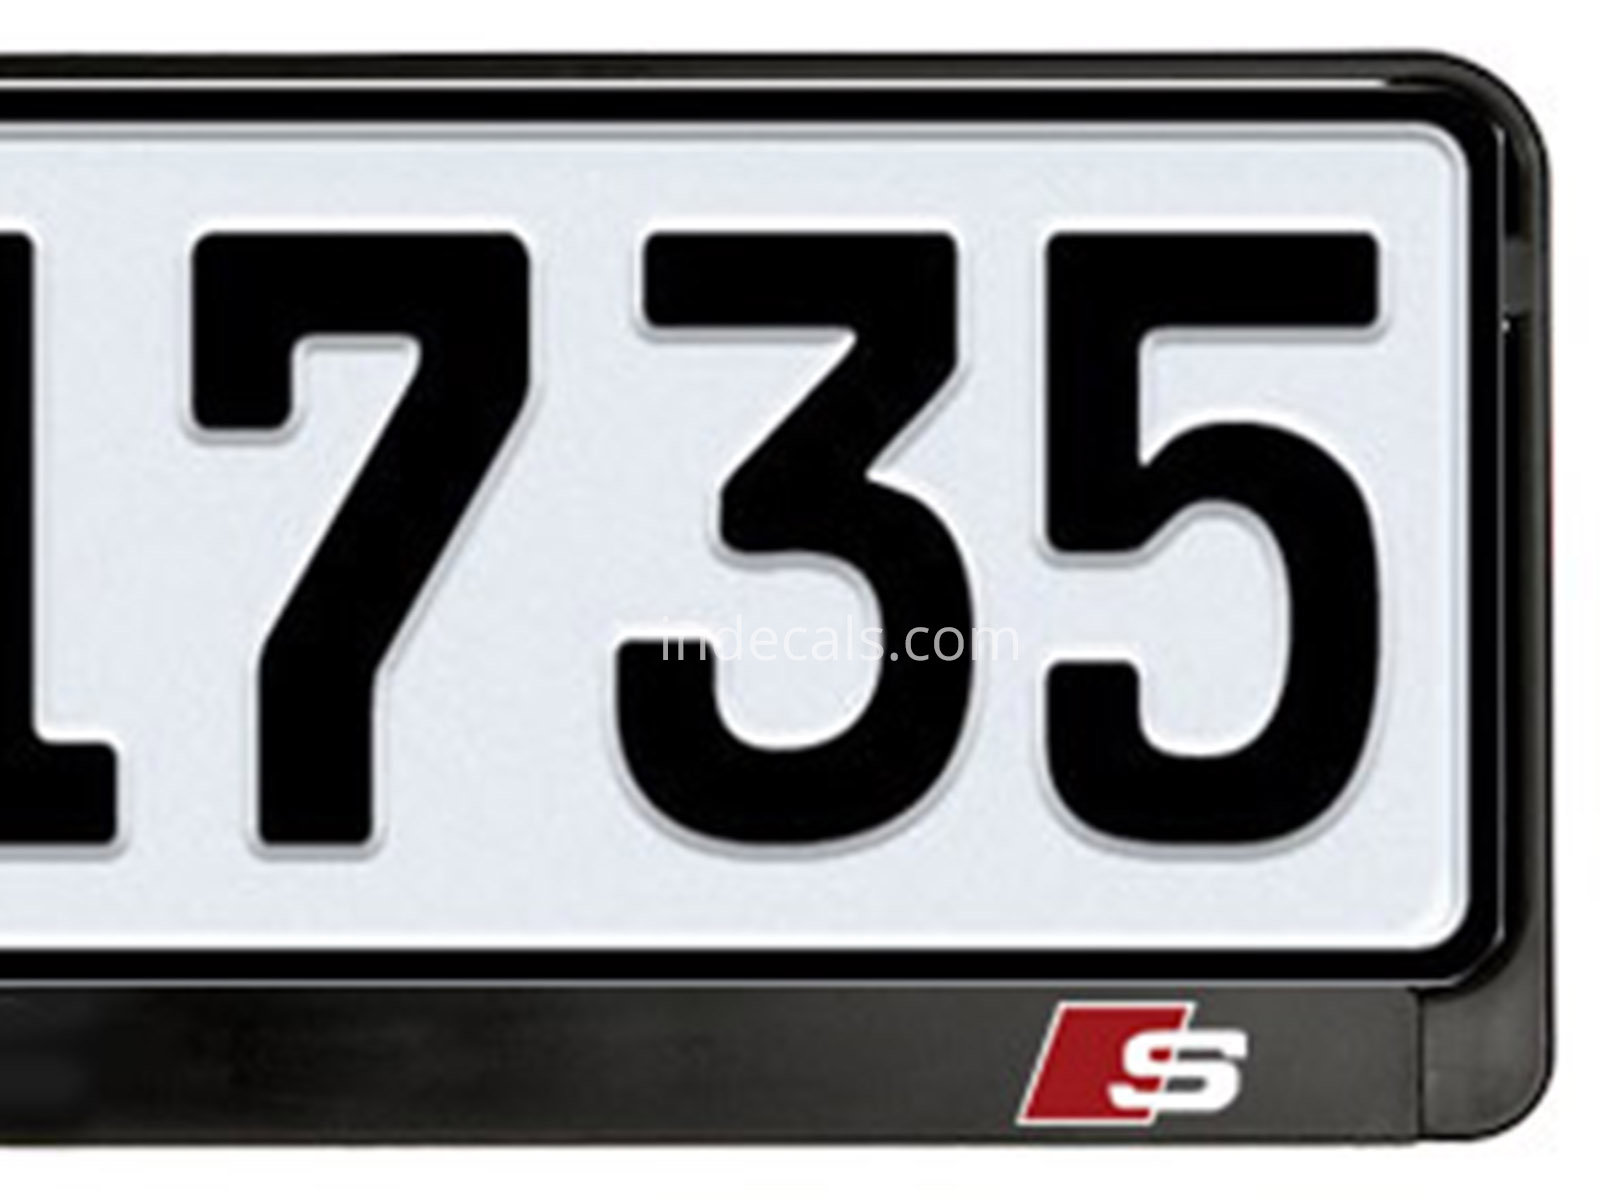 2 x Audi S-Line Stickers for Lincense Plate Frame - White + Red